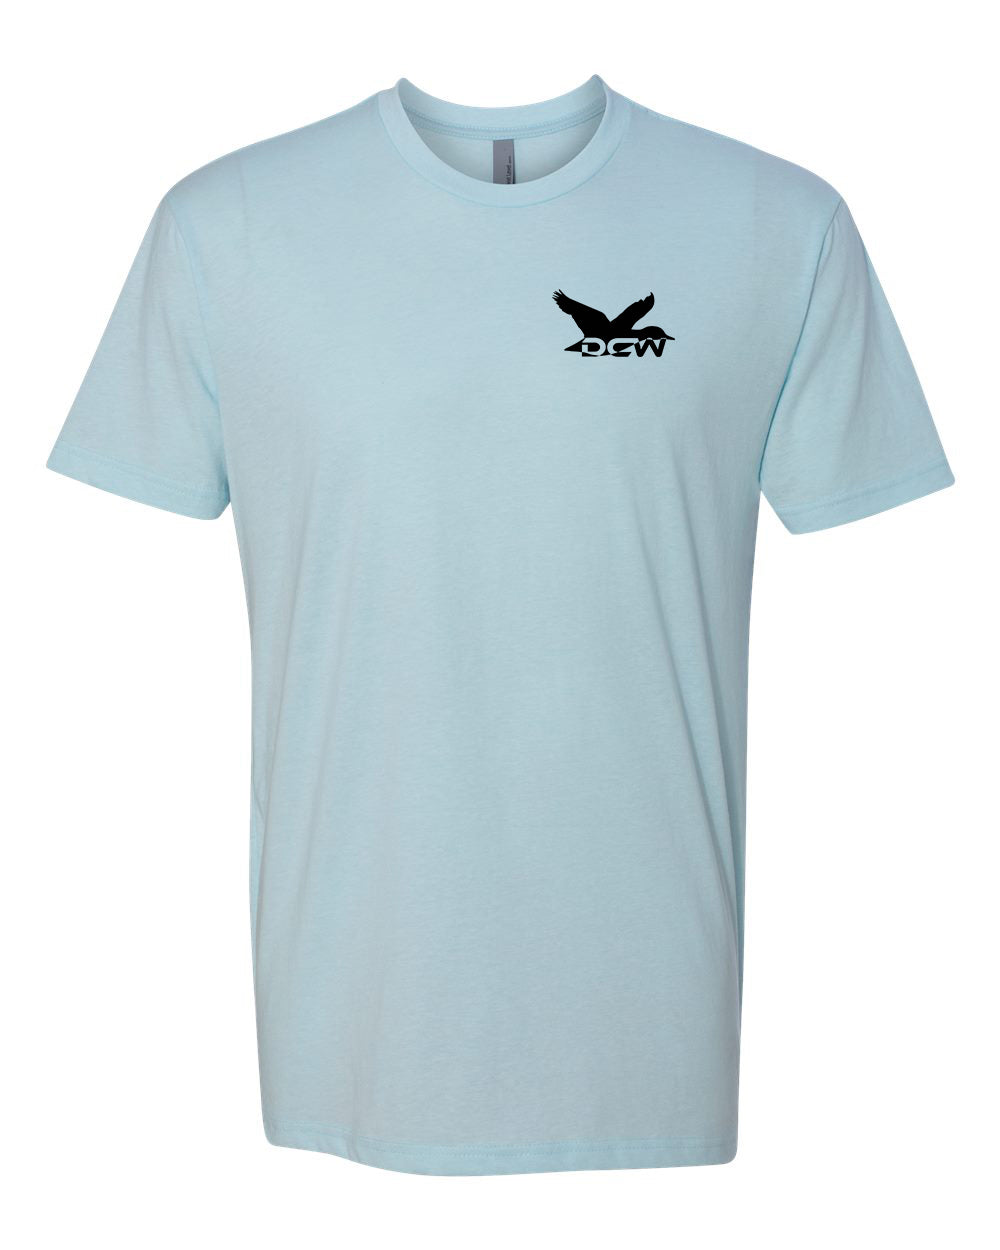 DCW Duck Chart - Next Level Tee